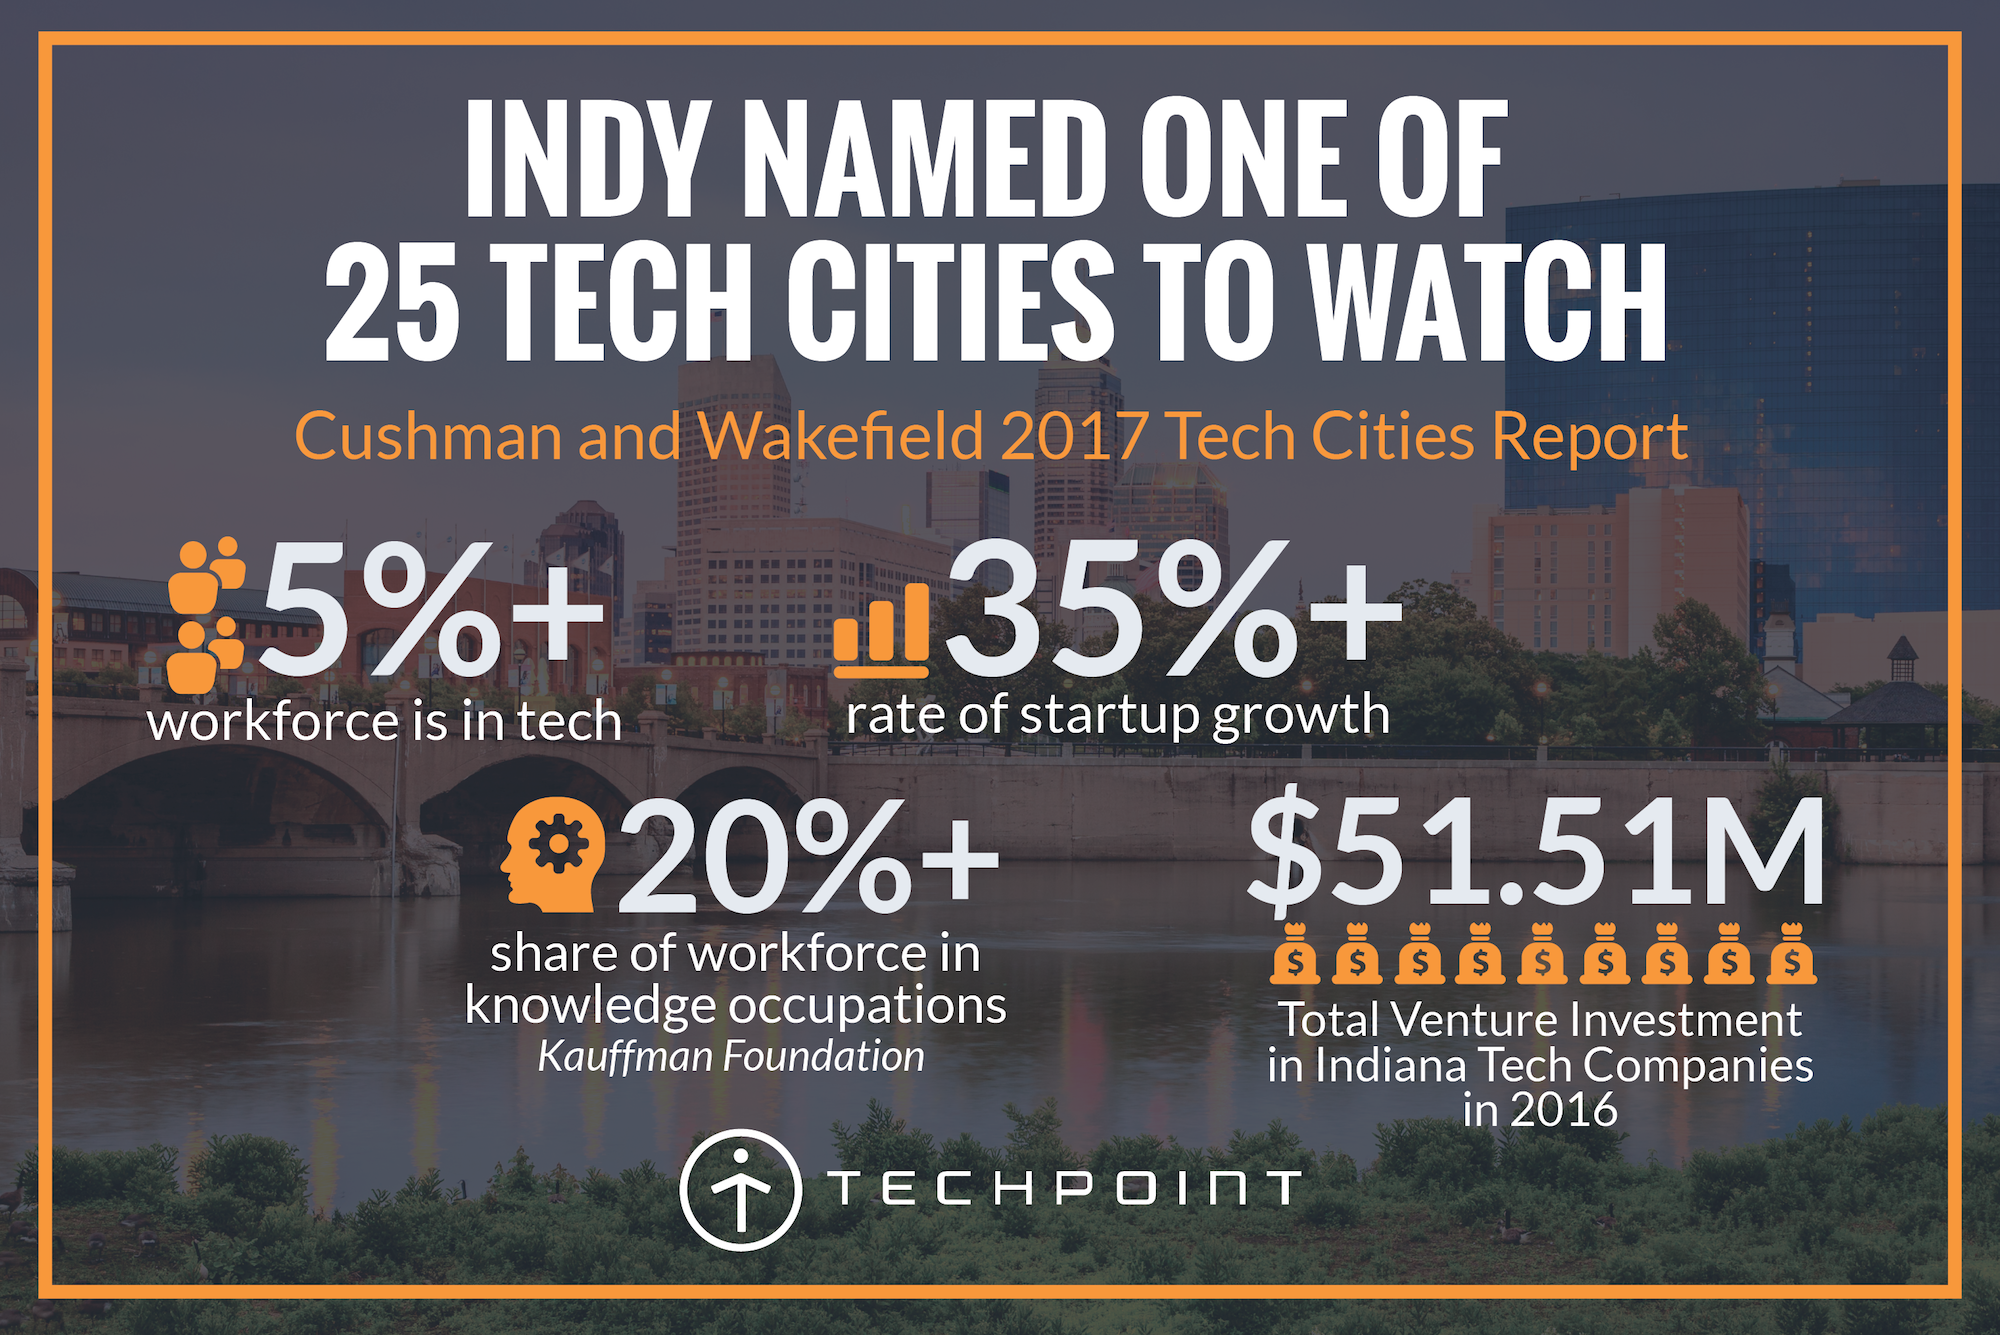 Indy Named One of 25 Tech Cities to Watch